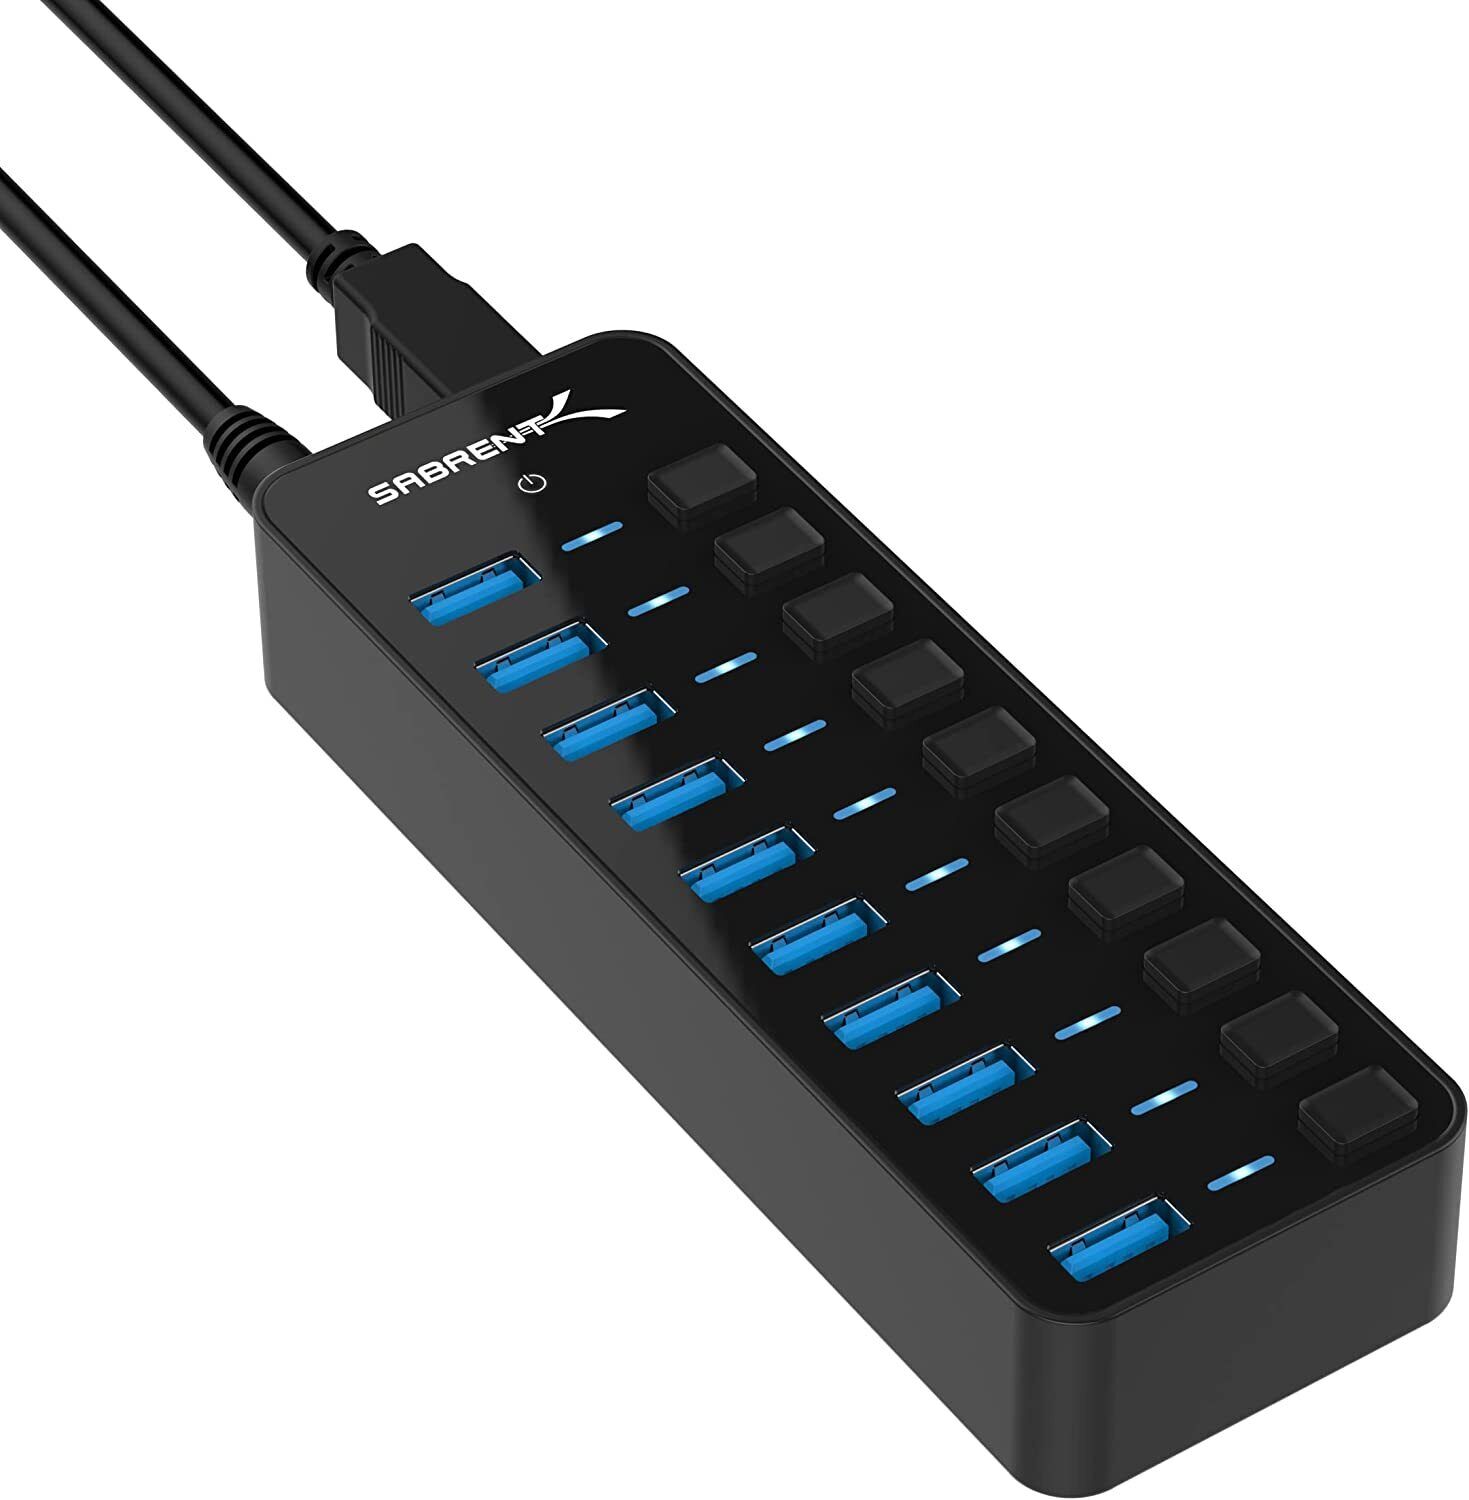 Sabrent 10-Port 60W USB 3.0 Hub with Individual Power Switches and LEDs(HB-BU10)